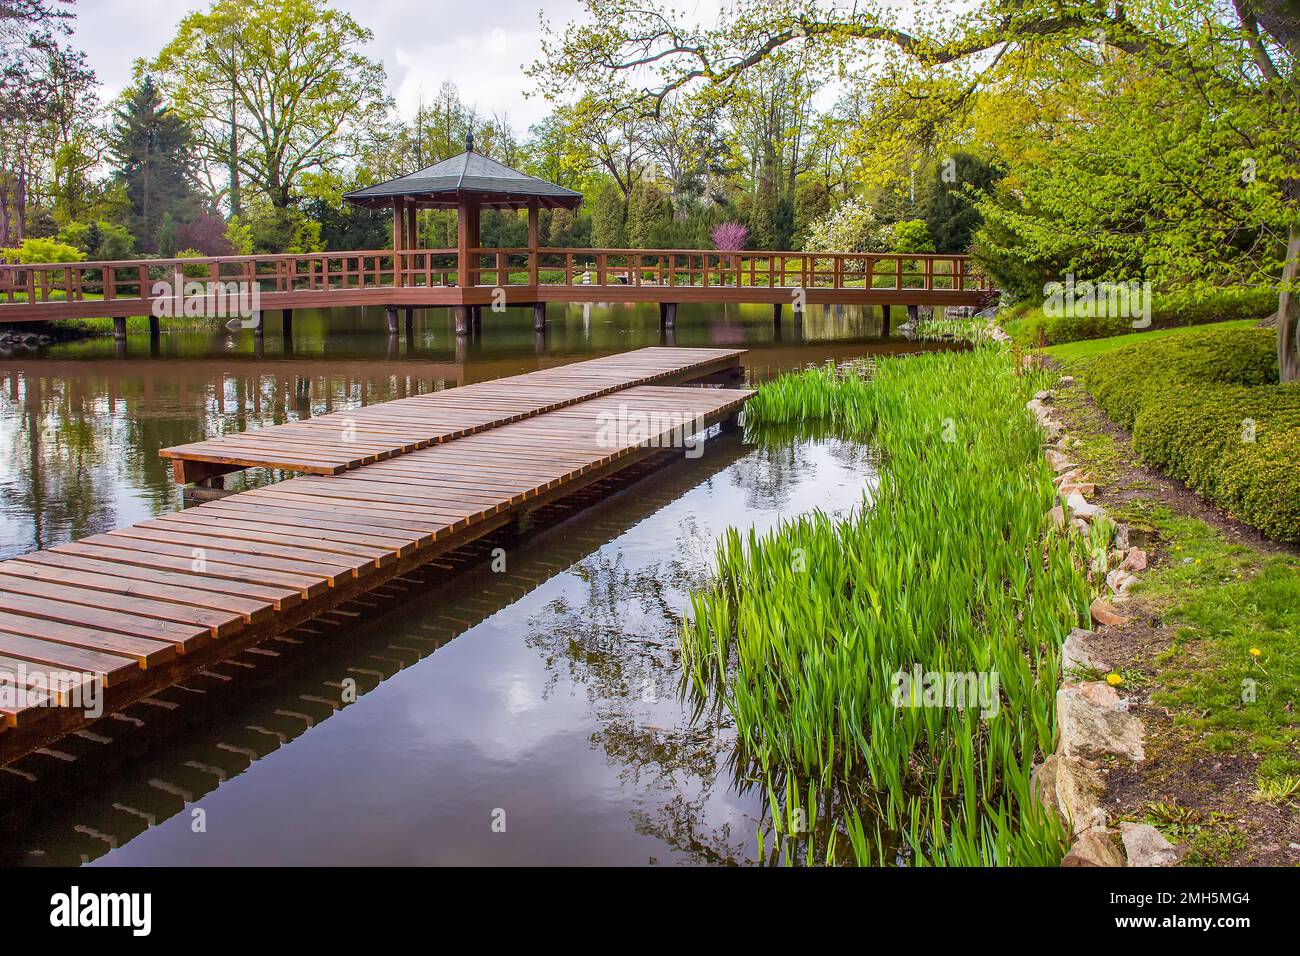 Amazing landscape in japanese garden of Wroclaw in late April with wooden pier (for sunbathing)  and wooden bridge with alcove through pond.  Pink che Stock Photo